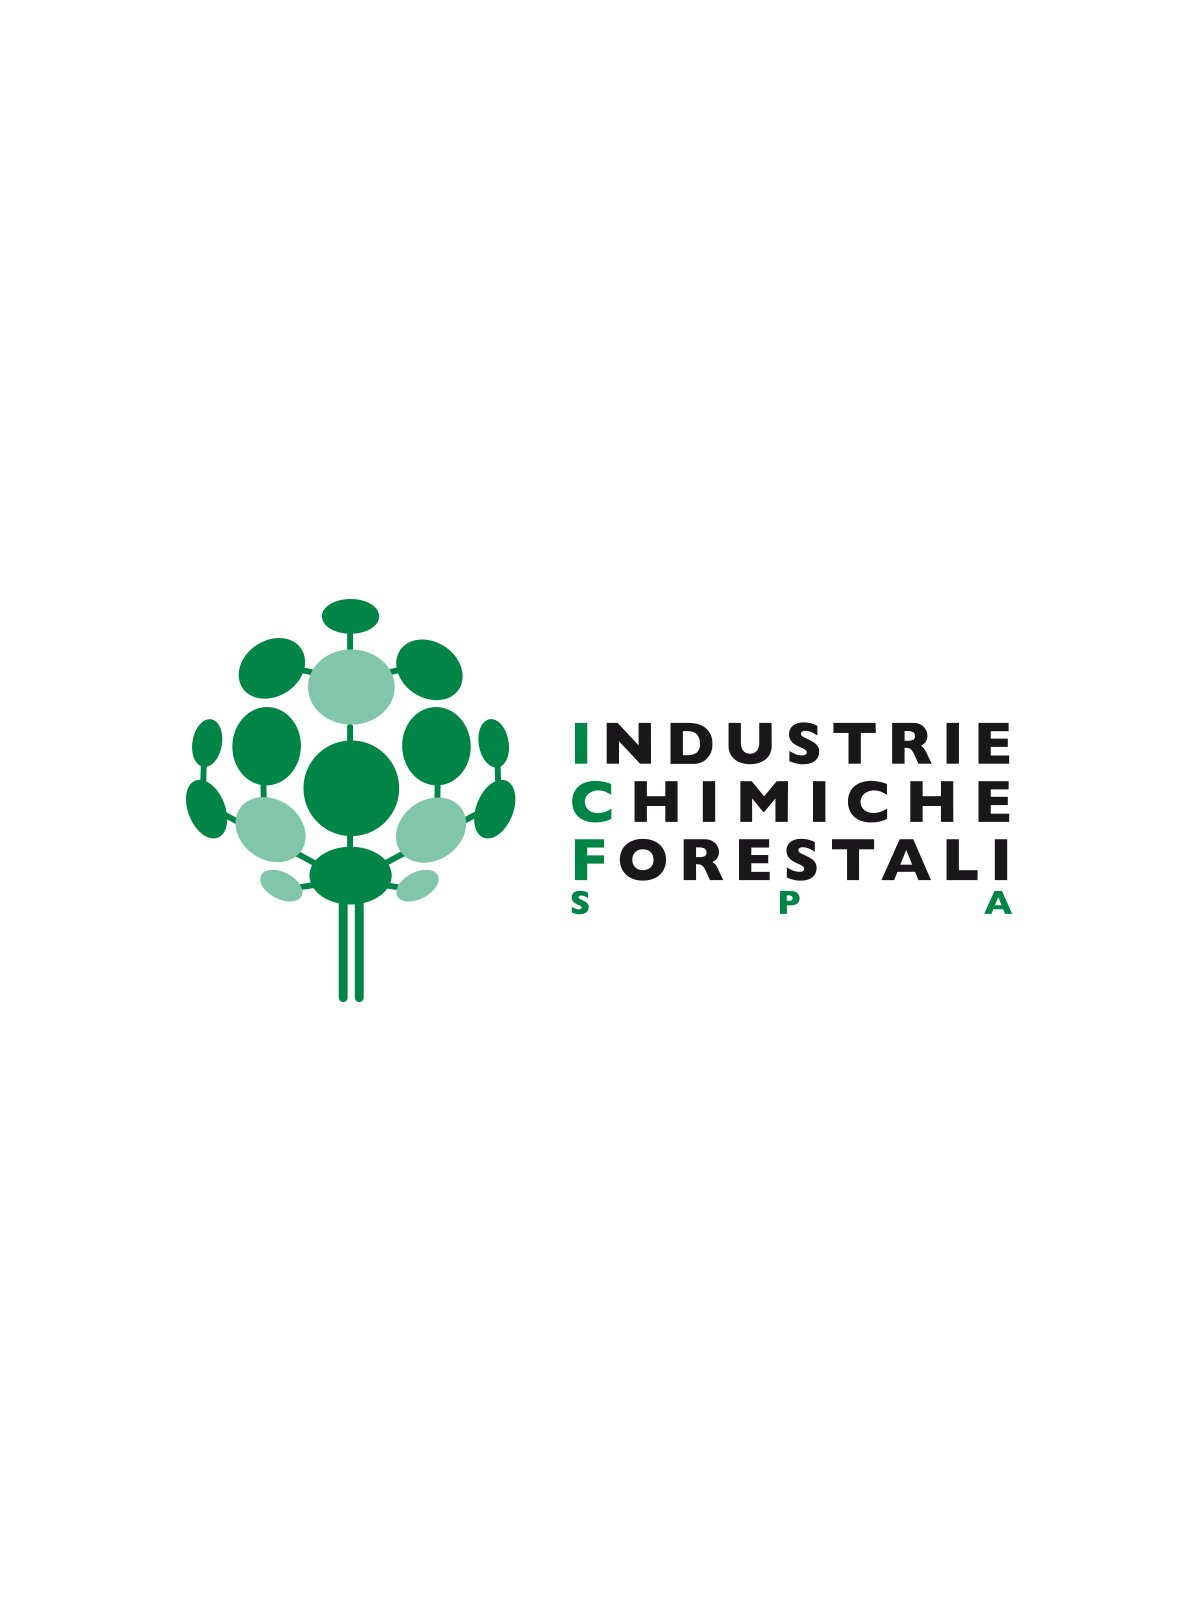 Breaking News:  Industrie Chimiche Forestali acquires Langè S.r.l. weaving business